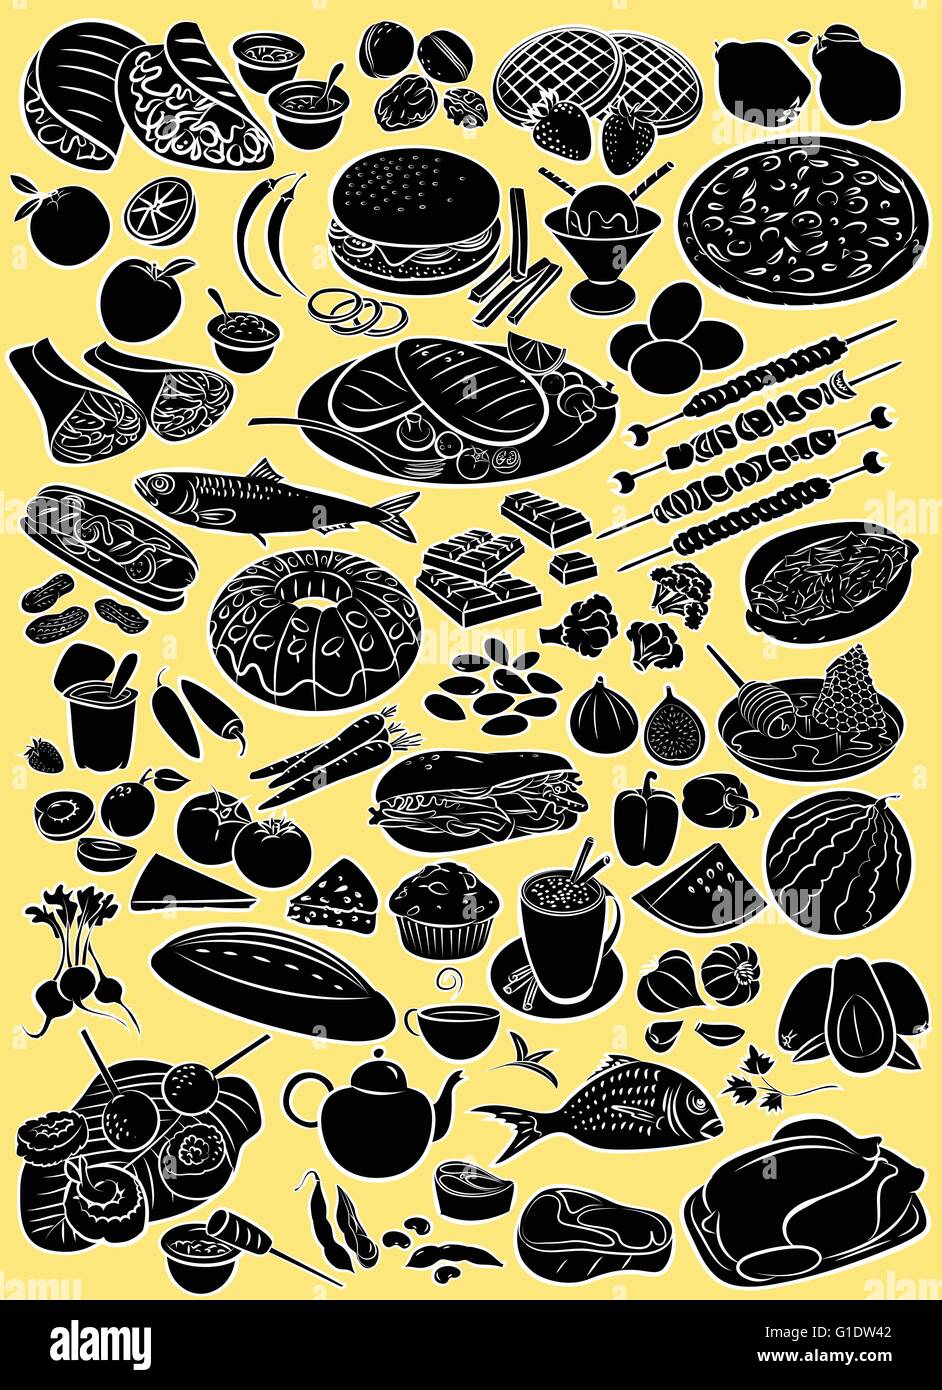 Vector illustration of food collection in silhouette mode on yellow background Stock Vector